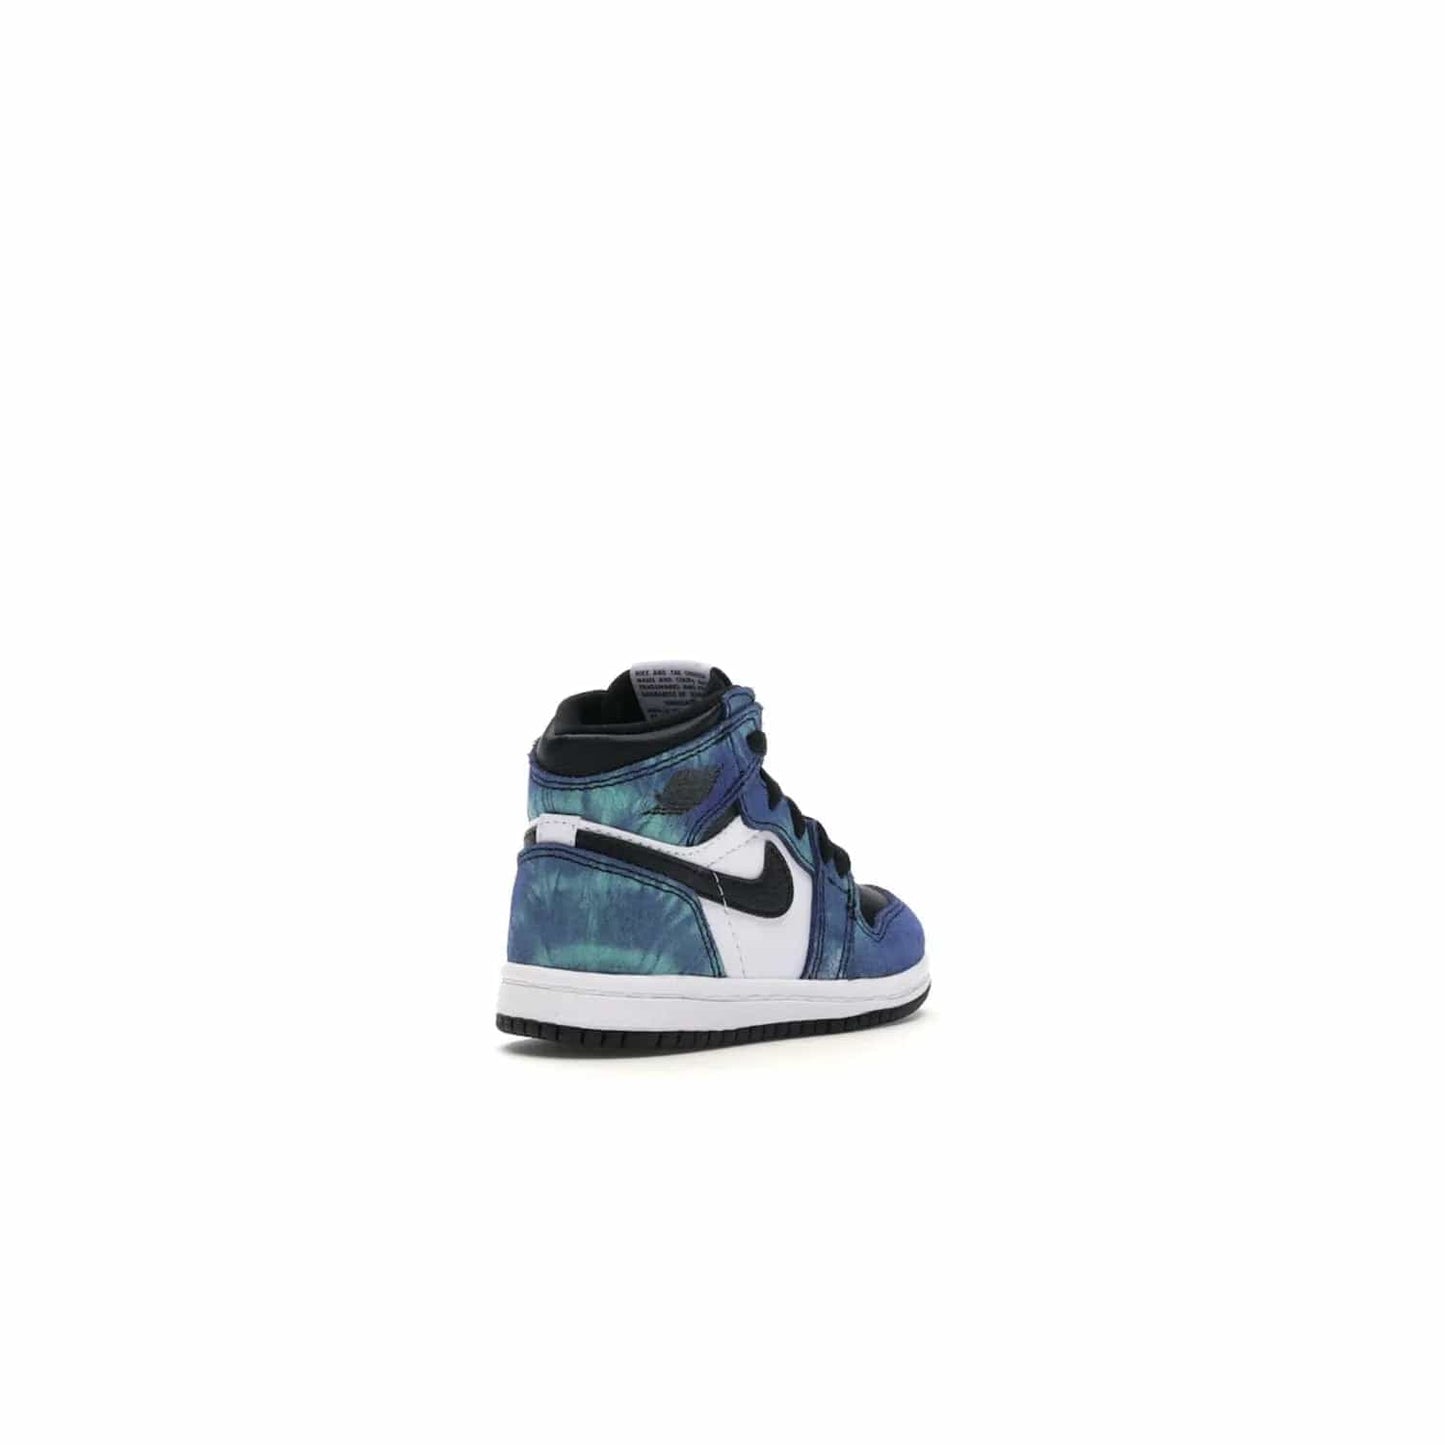 Jordan 1 Retro High Tie Dye (TD) - Image 32 - Only at www.BallersClubKickz.com - Add a unique twist to your sneaker collection with the Jordan 1 Retro High Tie Dye (TD). Classic Air Jordan 1 details like toe box perforations and the signature Swoosh logo on the sidewall are topped with an eye-catching tie dye design that’s perfect for styling all year round.